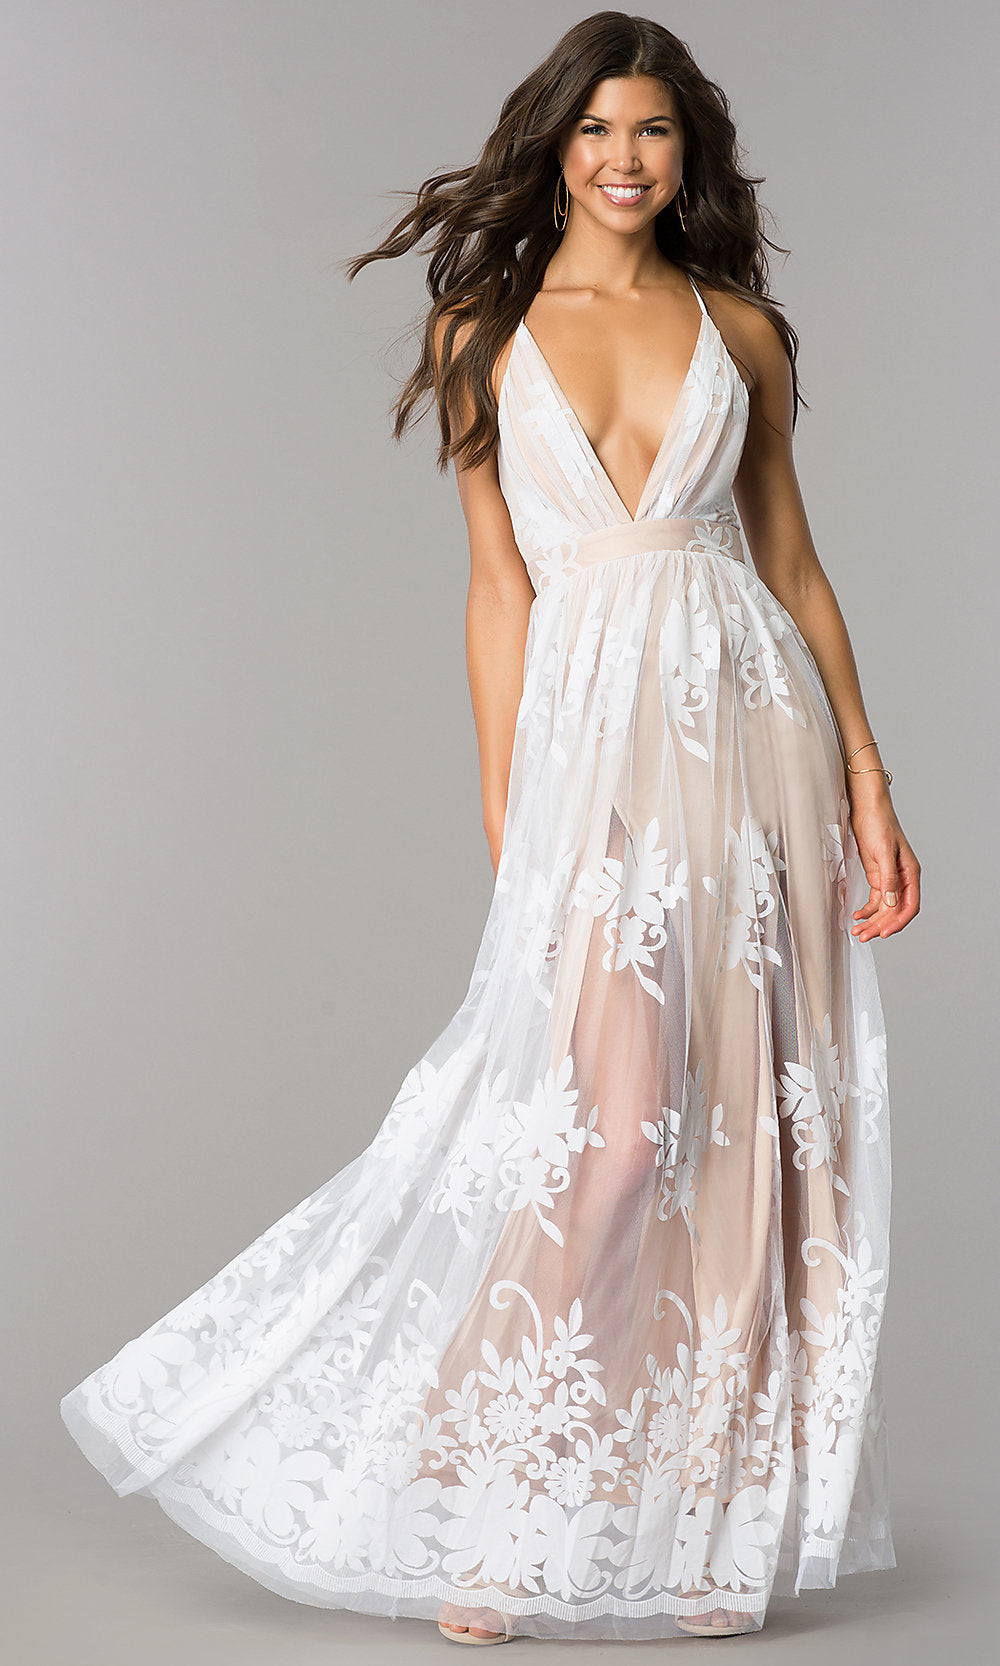 White/Nude Illusion Long Formal Dress with Low V-Neck and Slits